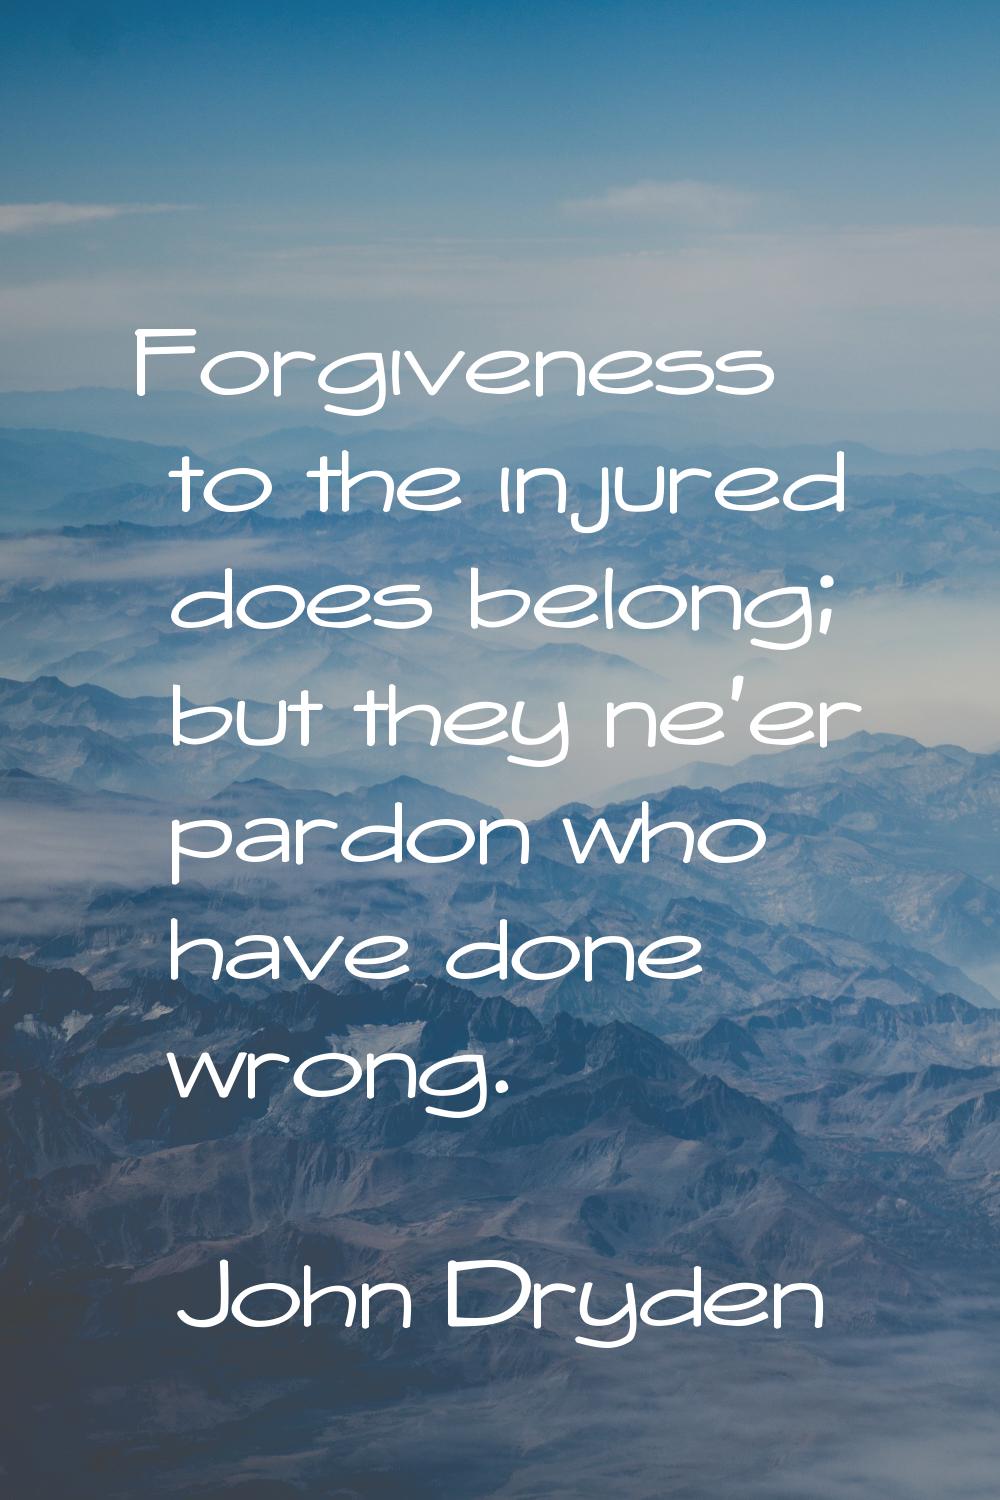 Forgiveness to the injured does belong; but they ne'er pardon who have done wrong.